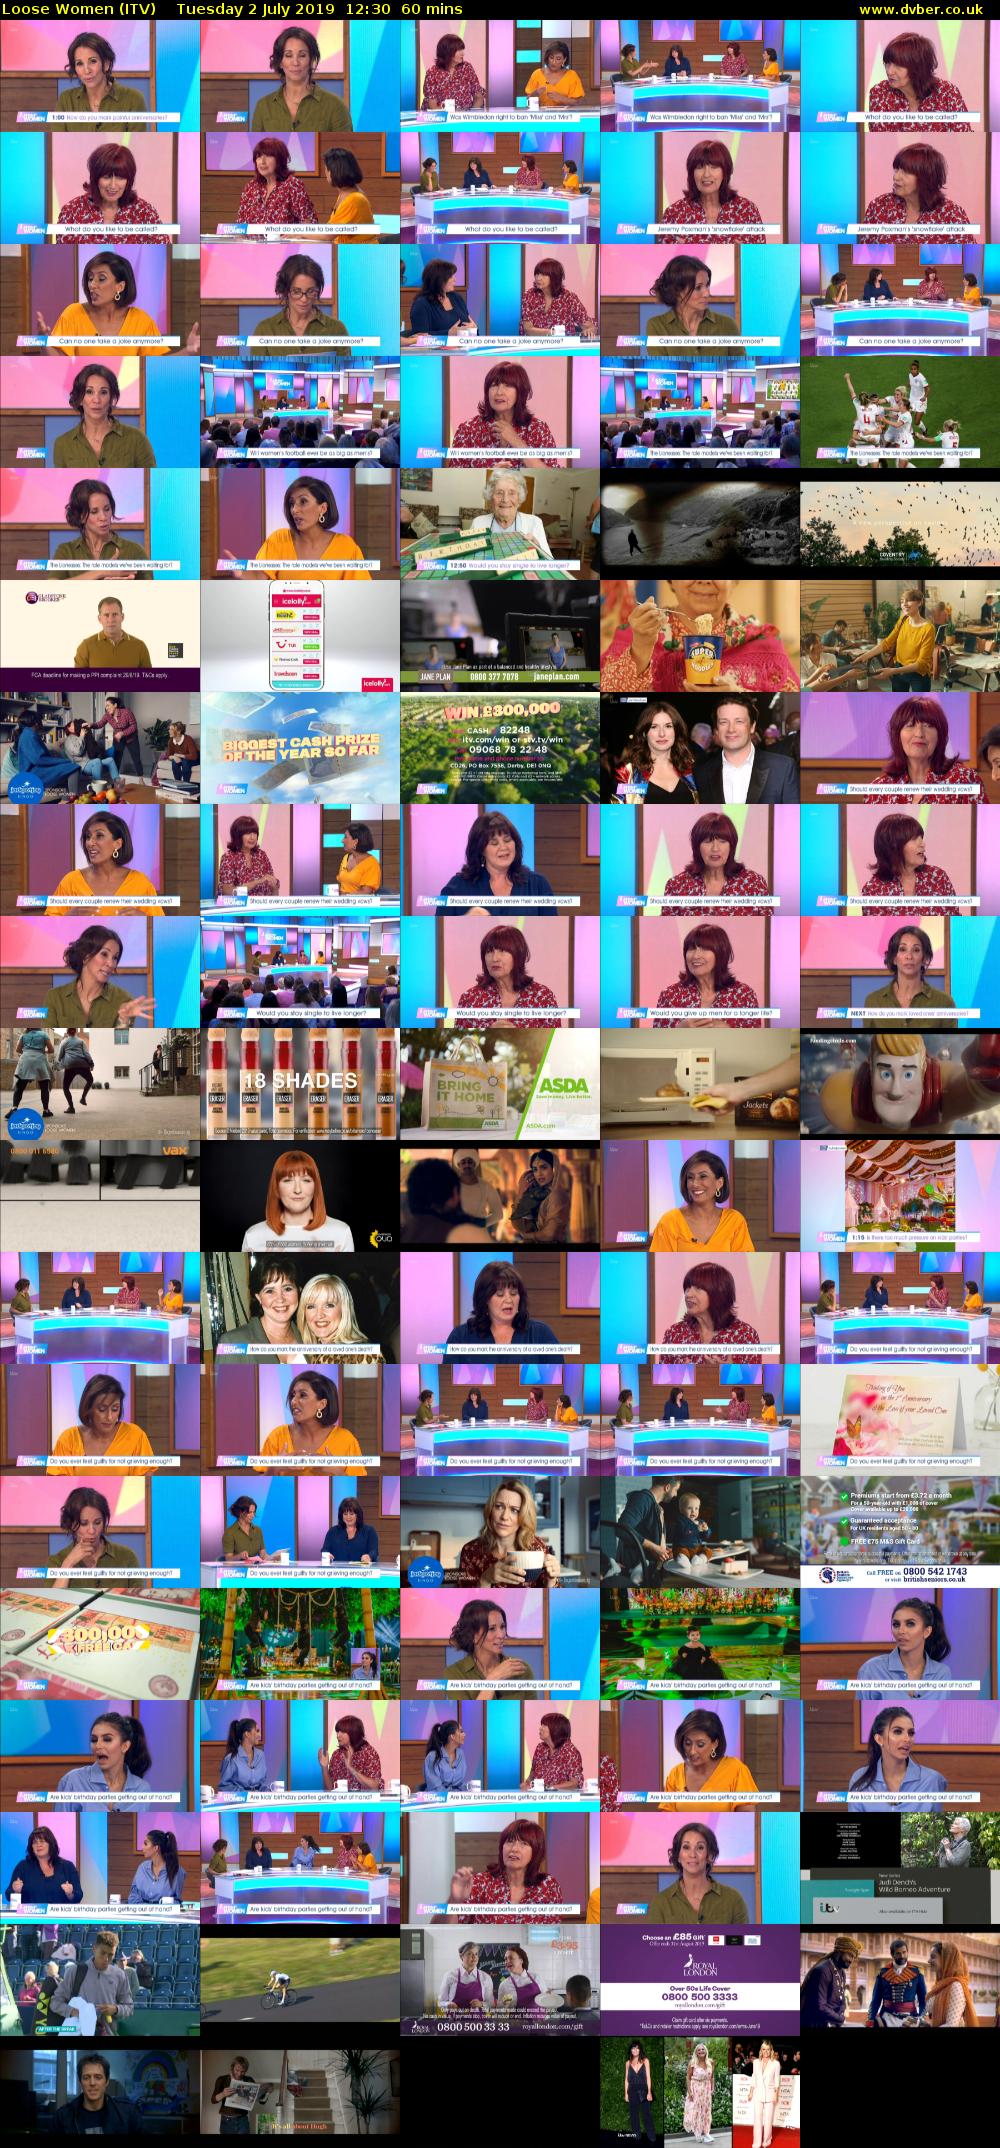 Loose Women (ITV) Tuesday 2 July 2019 12:30 - 13:30